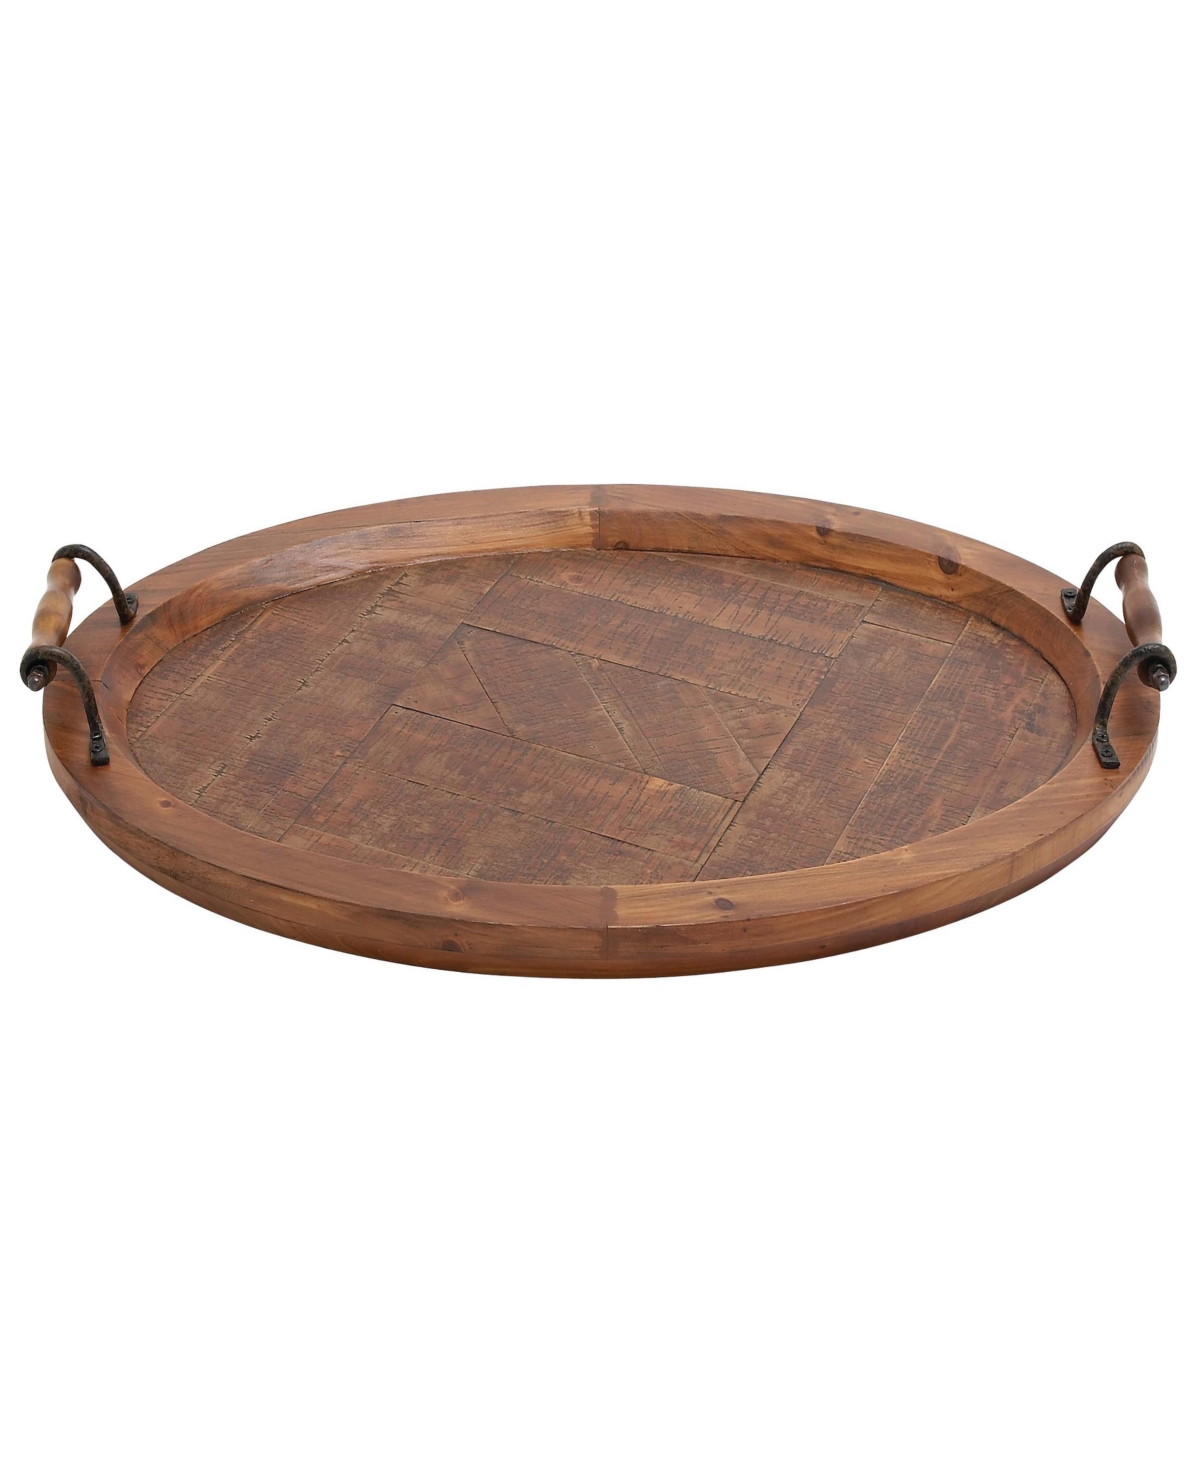 Rosemary Lane Wood Tray With Metal Handles, 29" X 19" X 4" In Brown